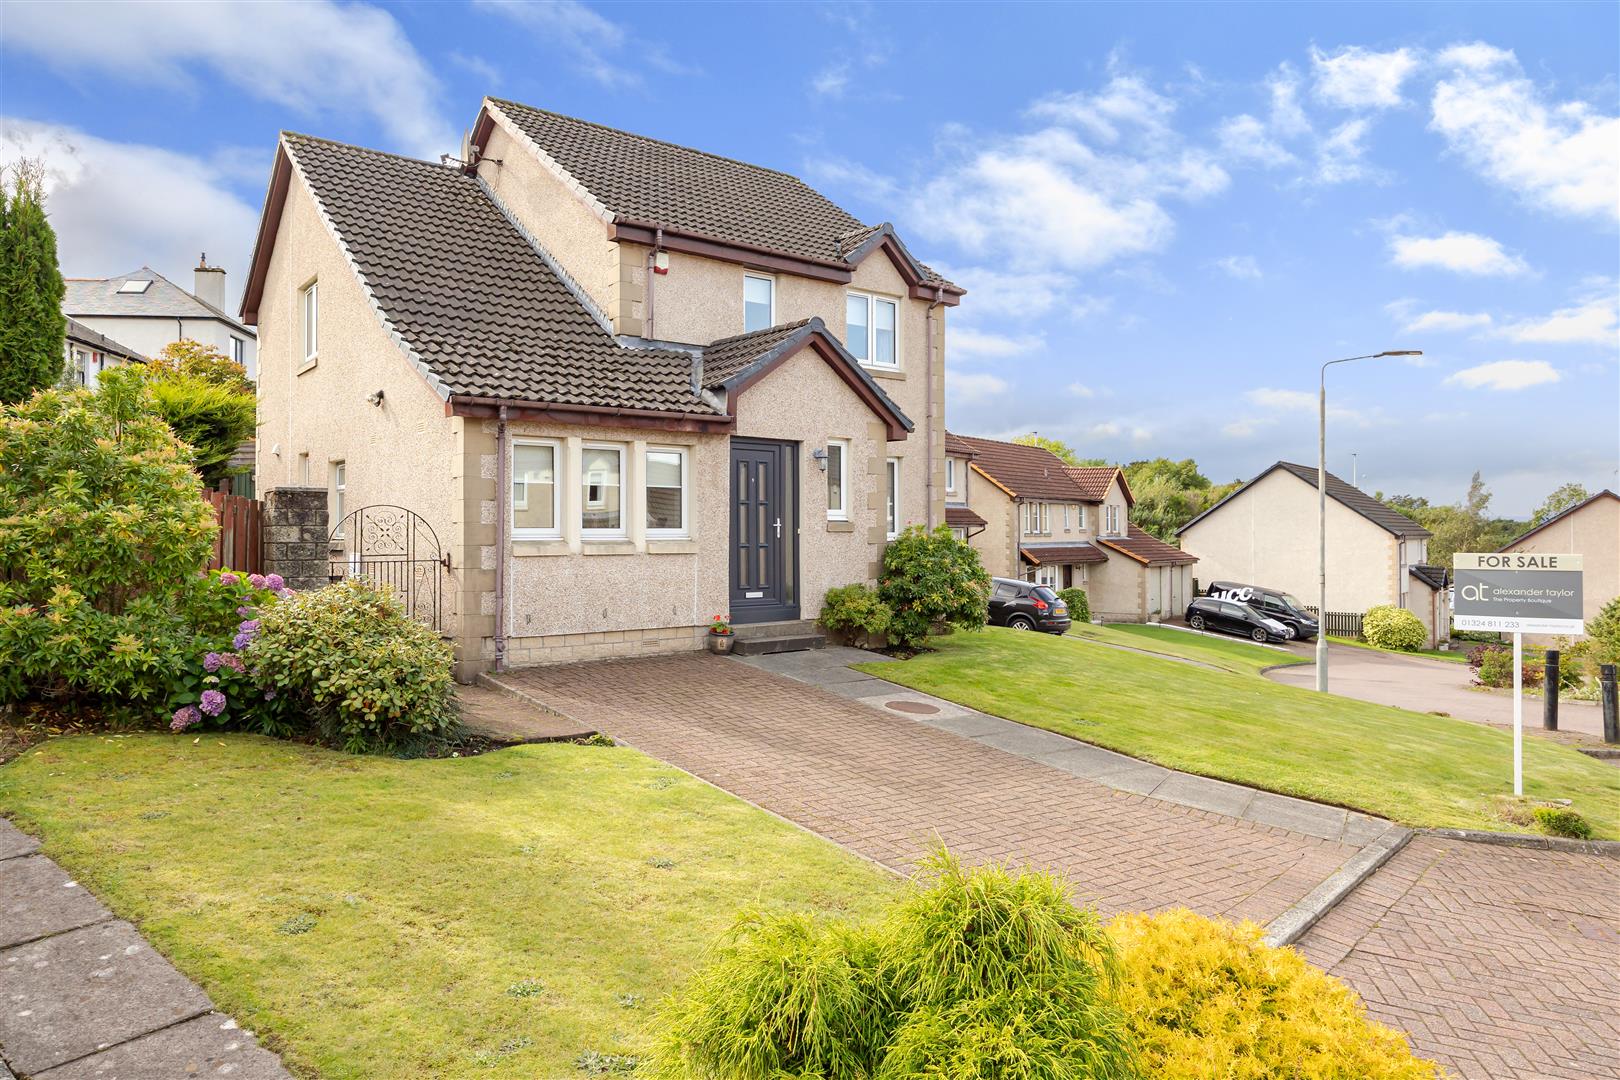 4 bed detached house for sale in Mckell Court, Falkirk, FK1 